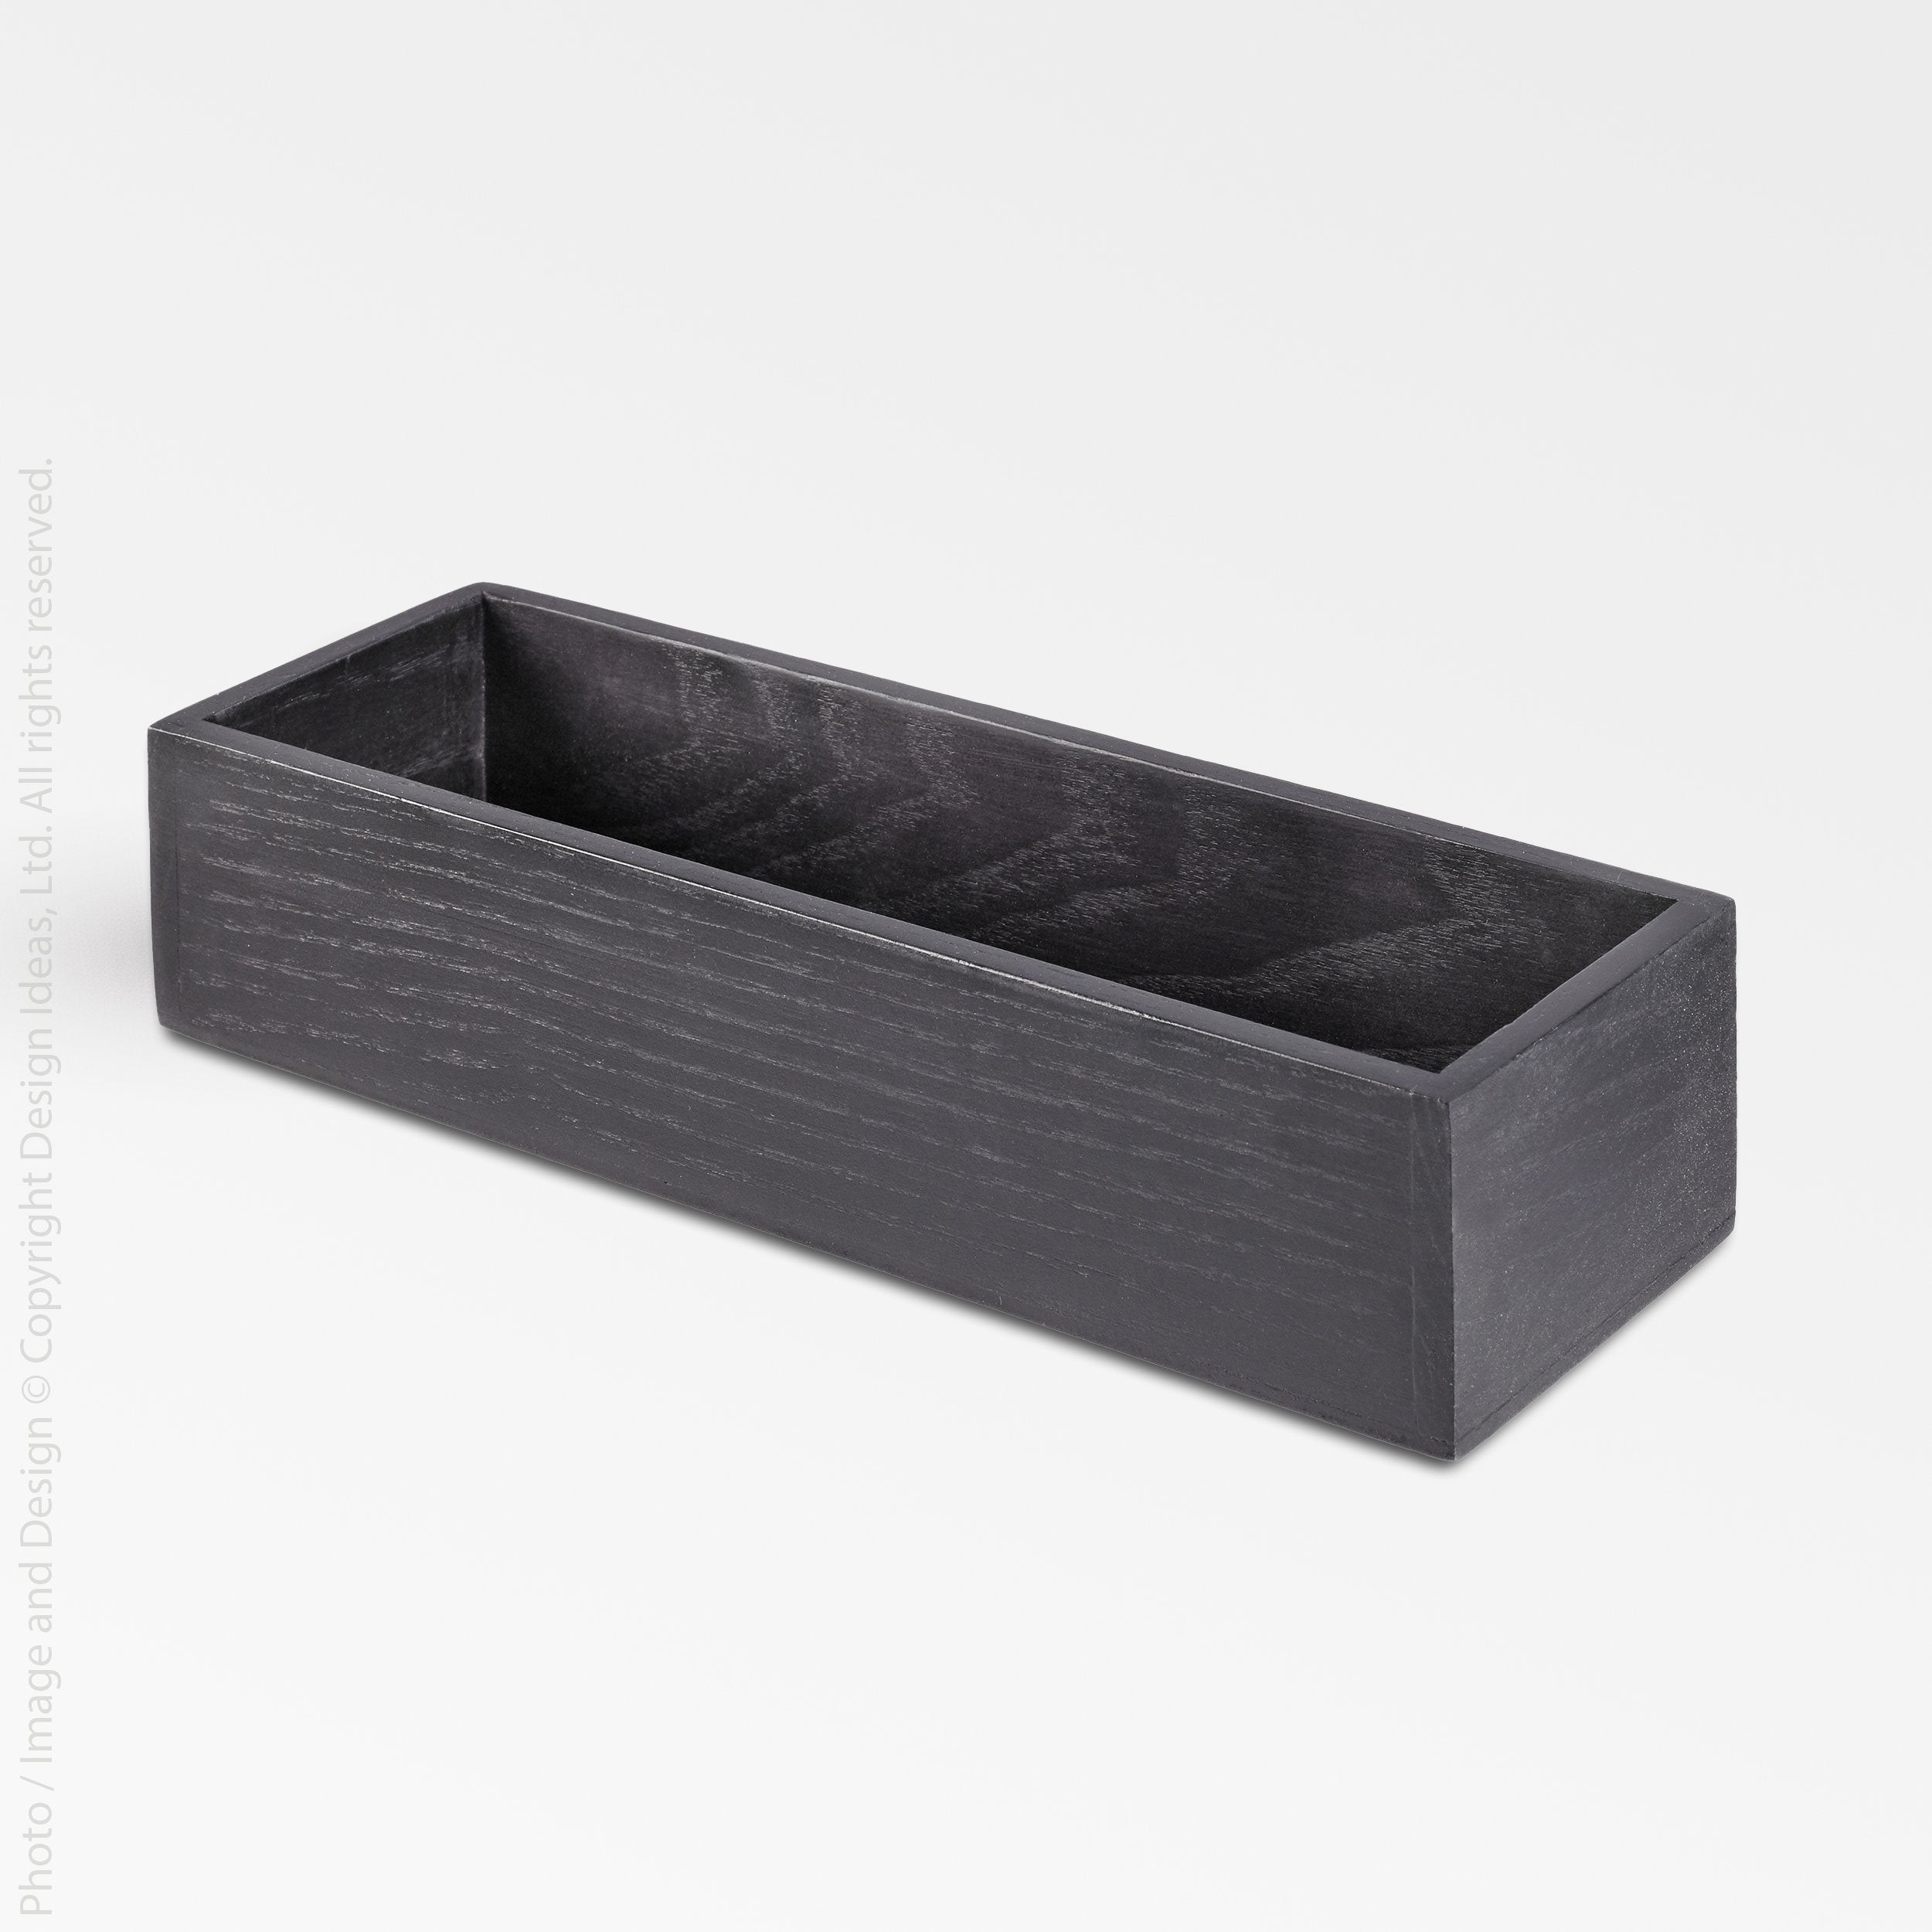 Ashland Ash Wood Drawer Organizer (3x9) - Black Color | Image 1 | From the Ashland Collection | Expertly crafted with natural ash wood for long lasting use | Available in black color | texxture home